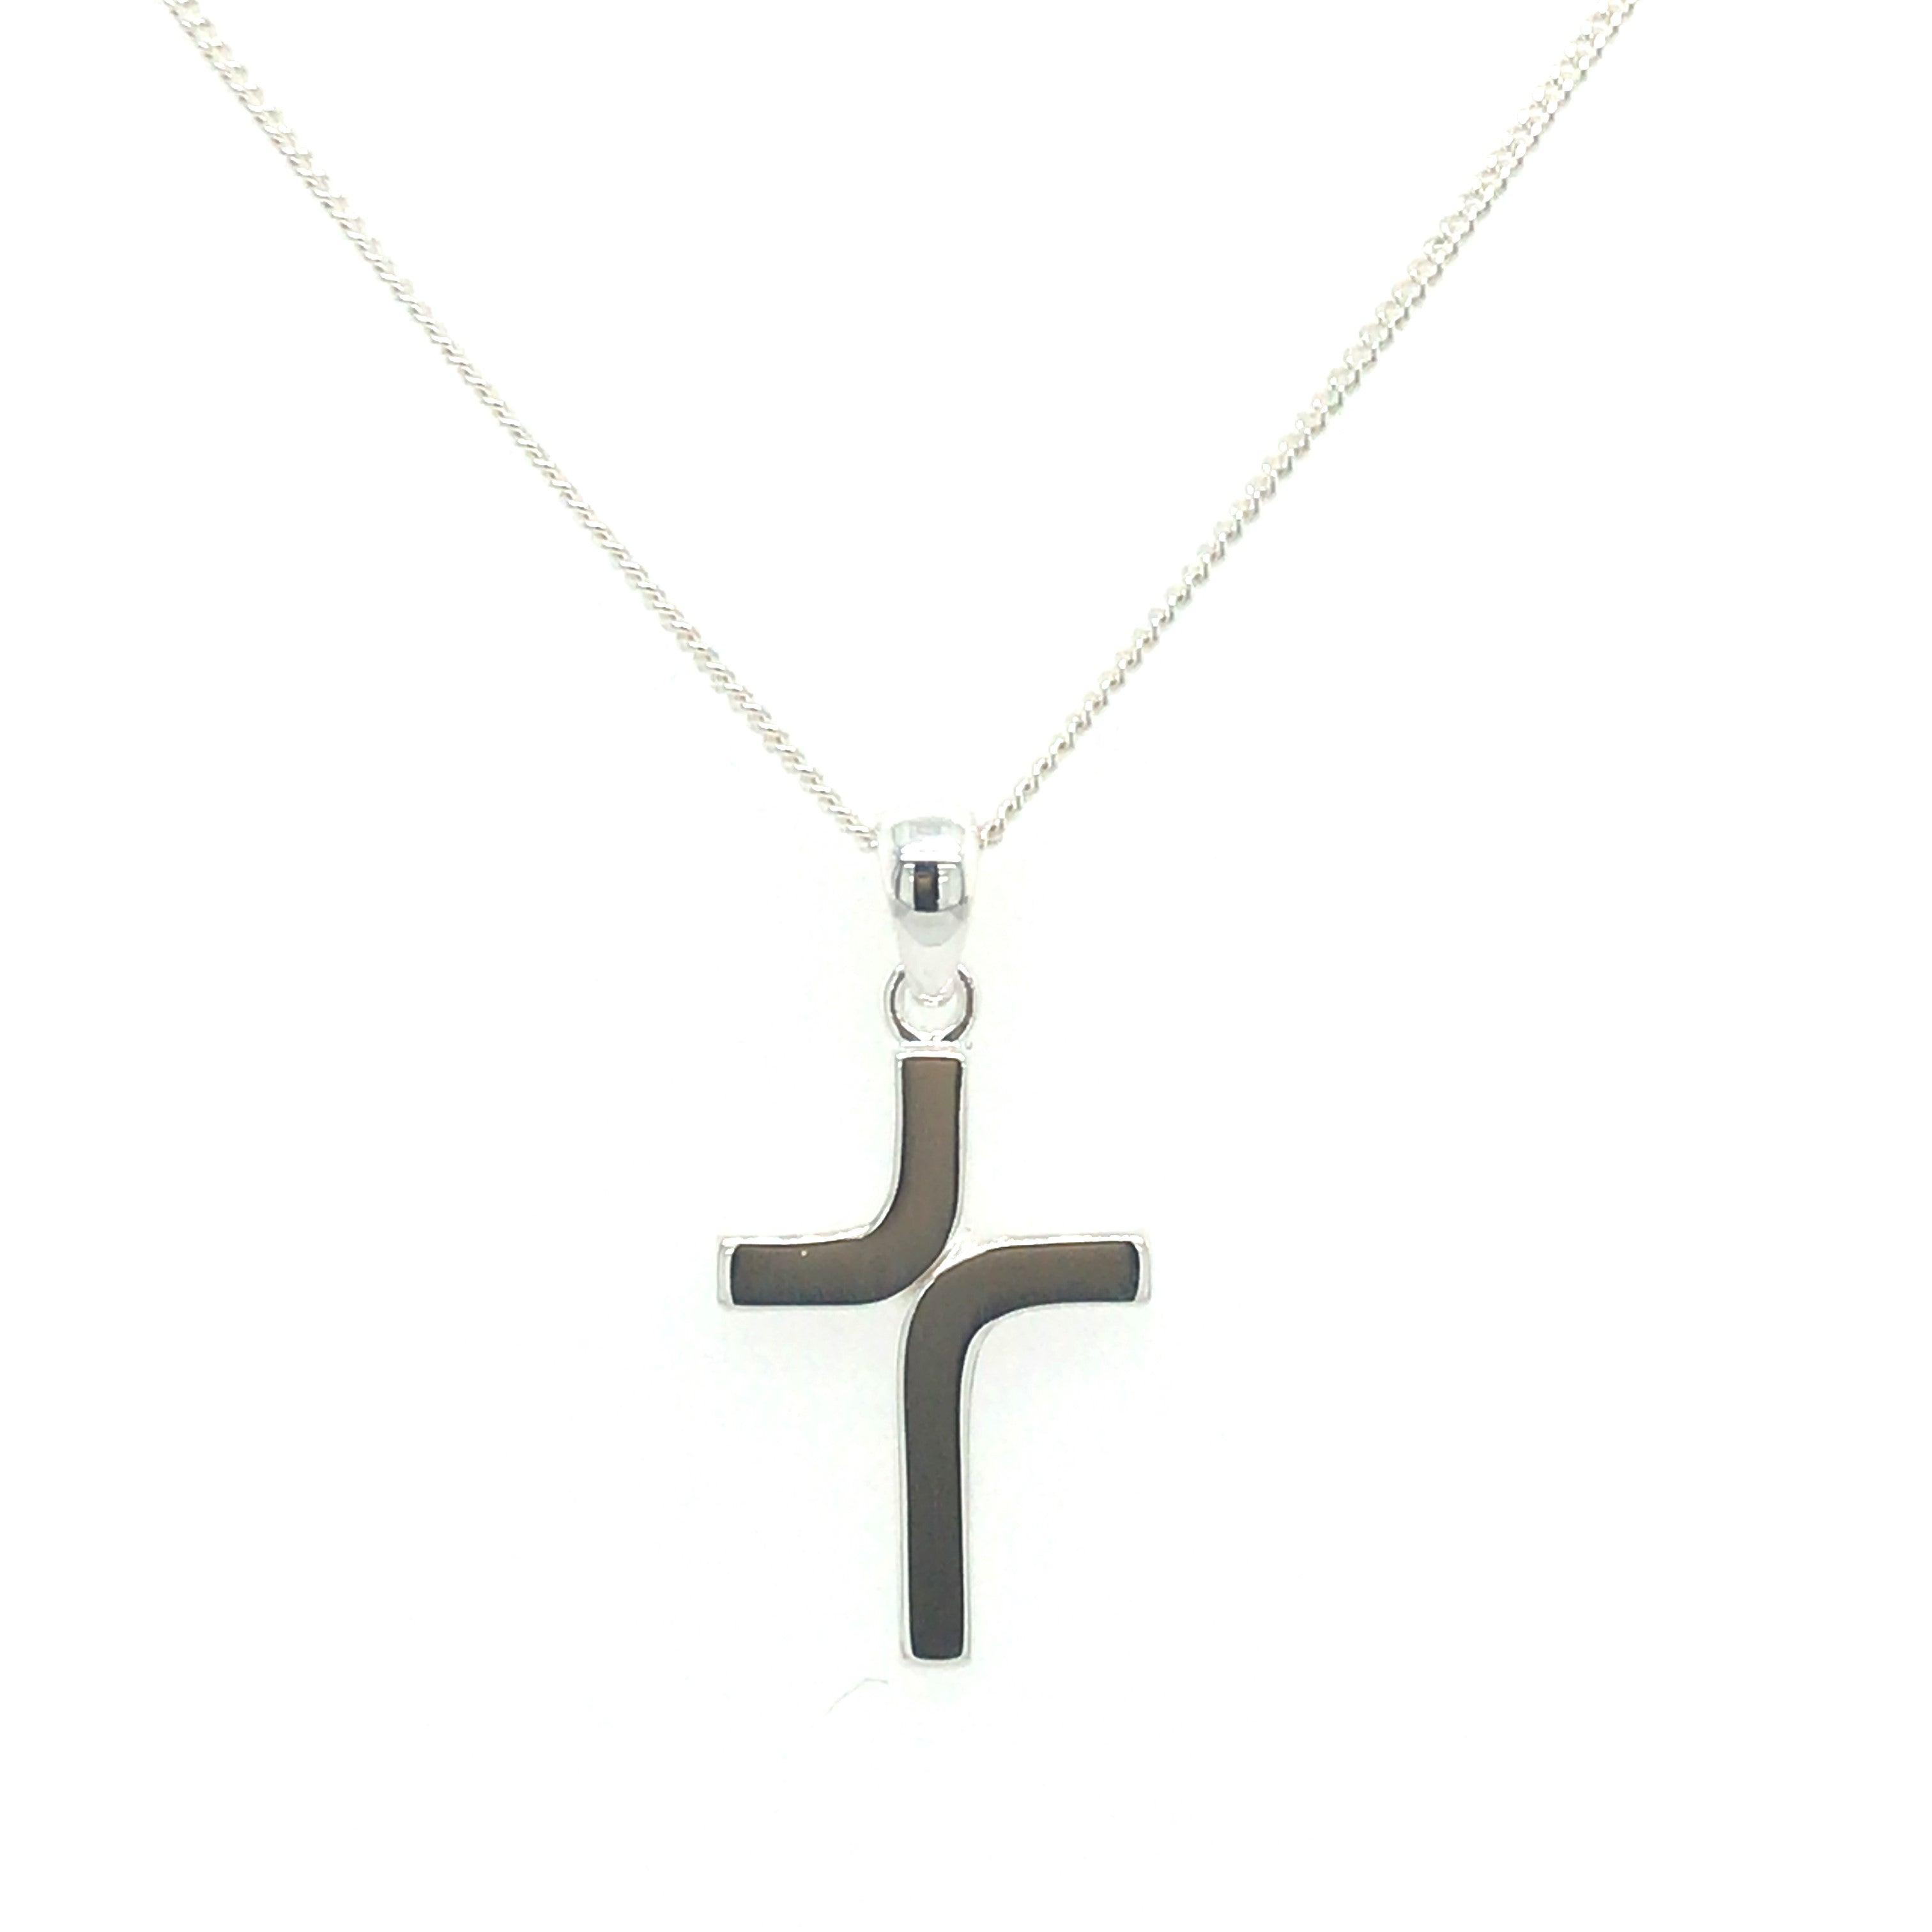 Silver Polished Curved Cross Pendant on Chain